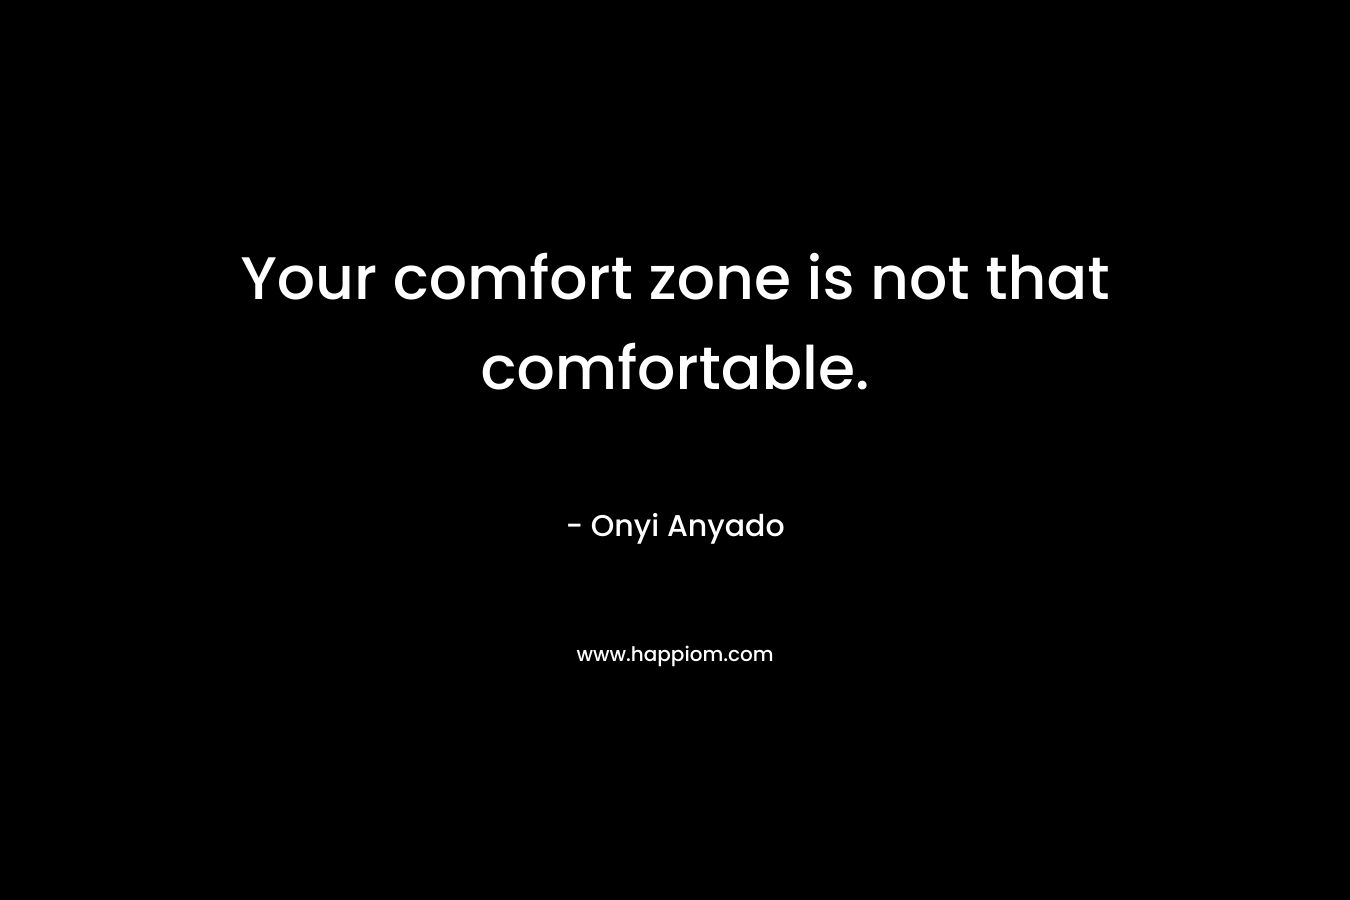 Your comfort zone is not that comfortable.